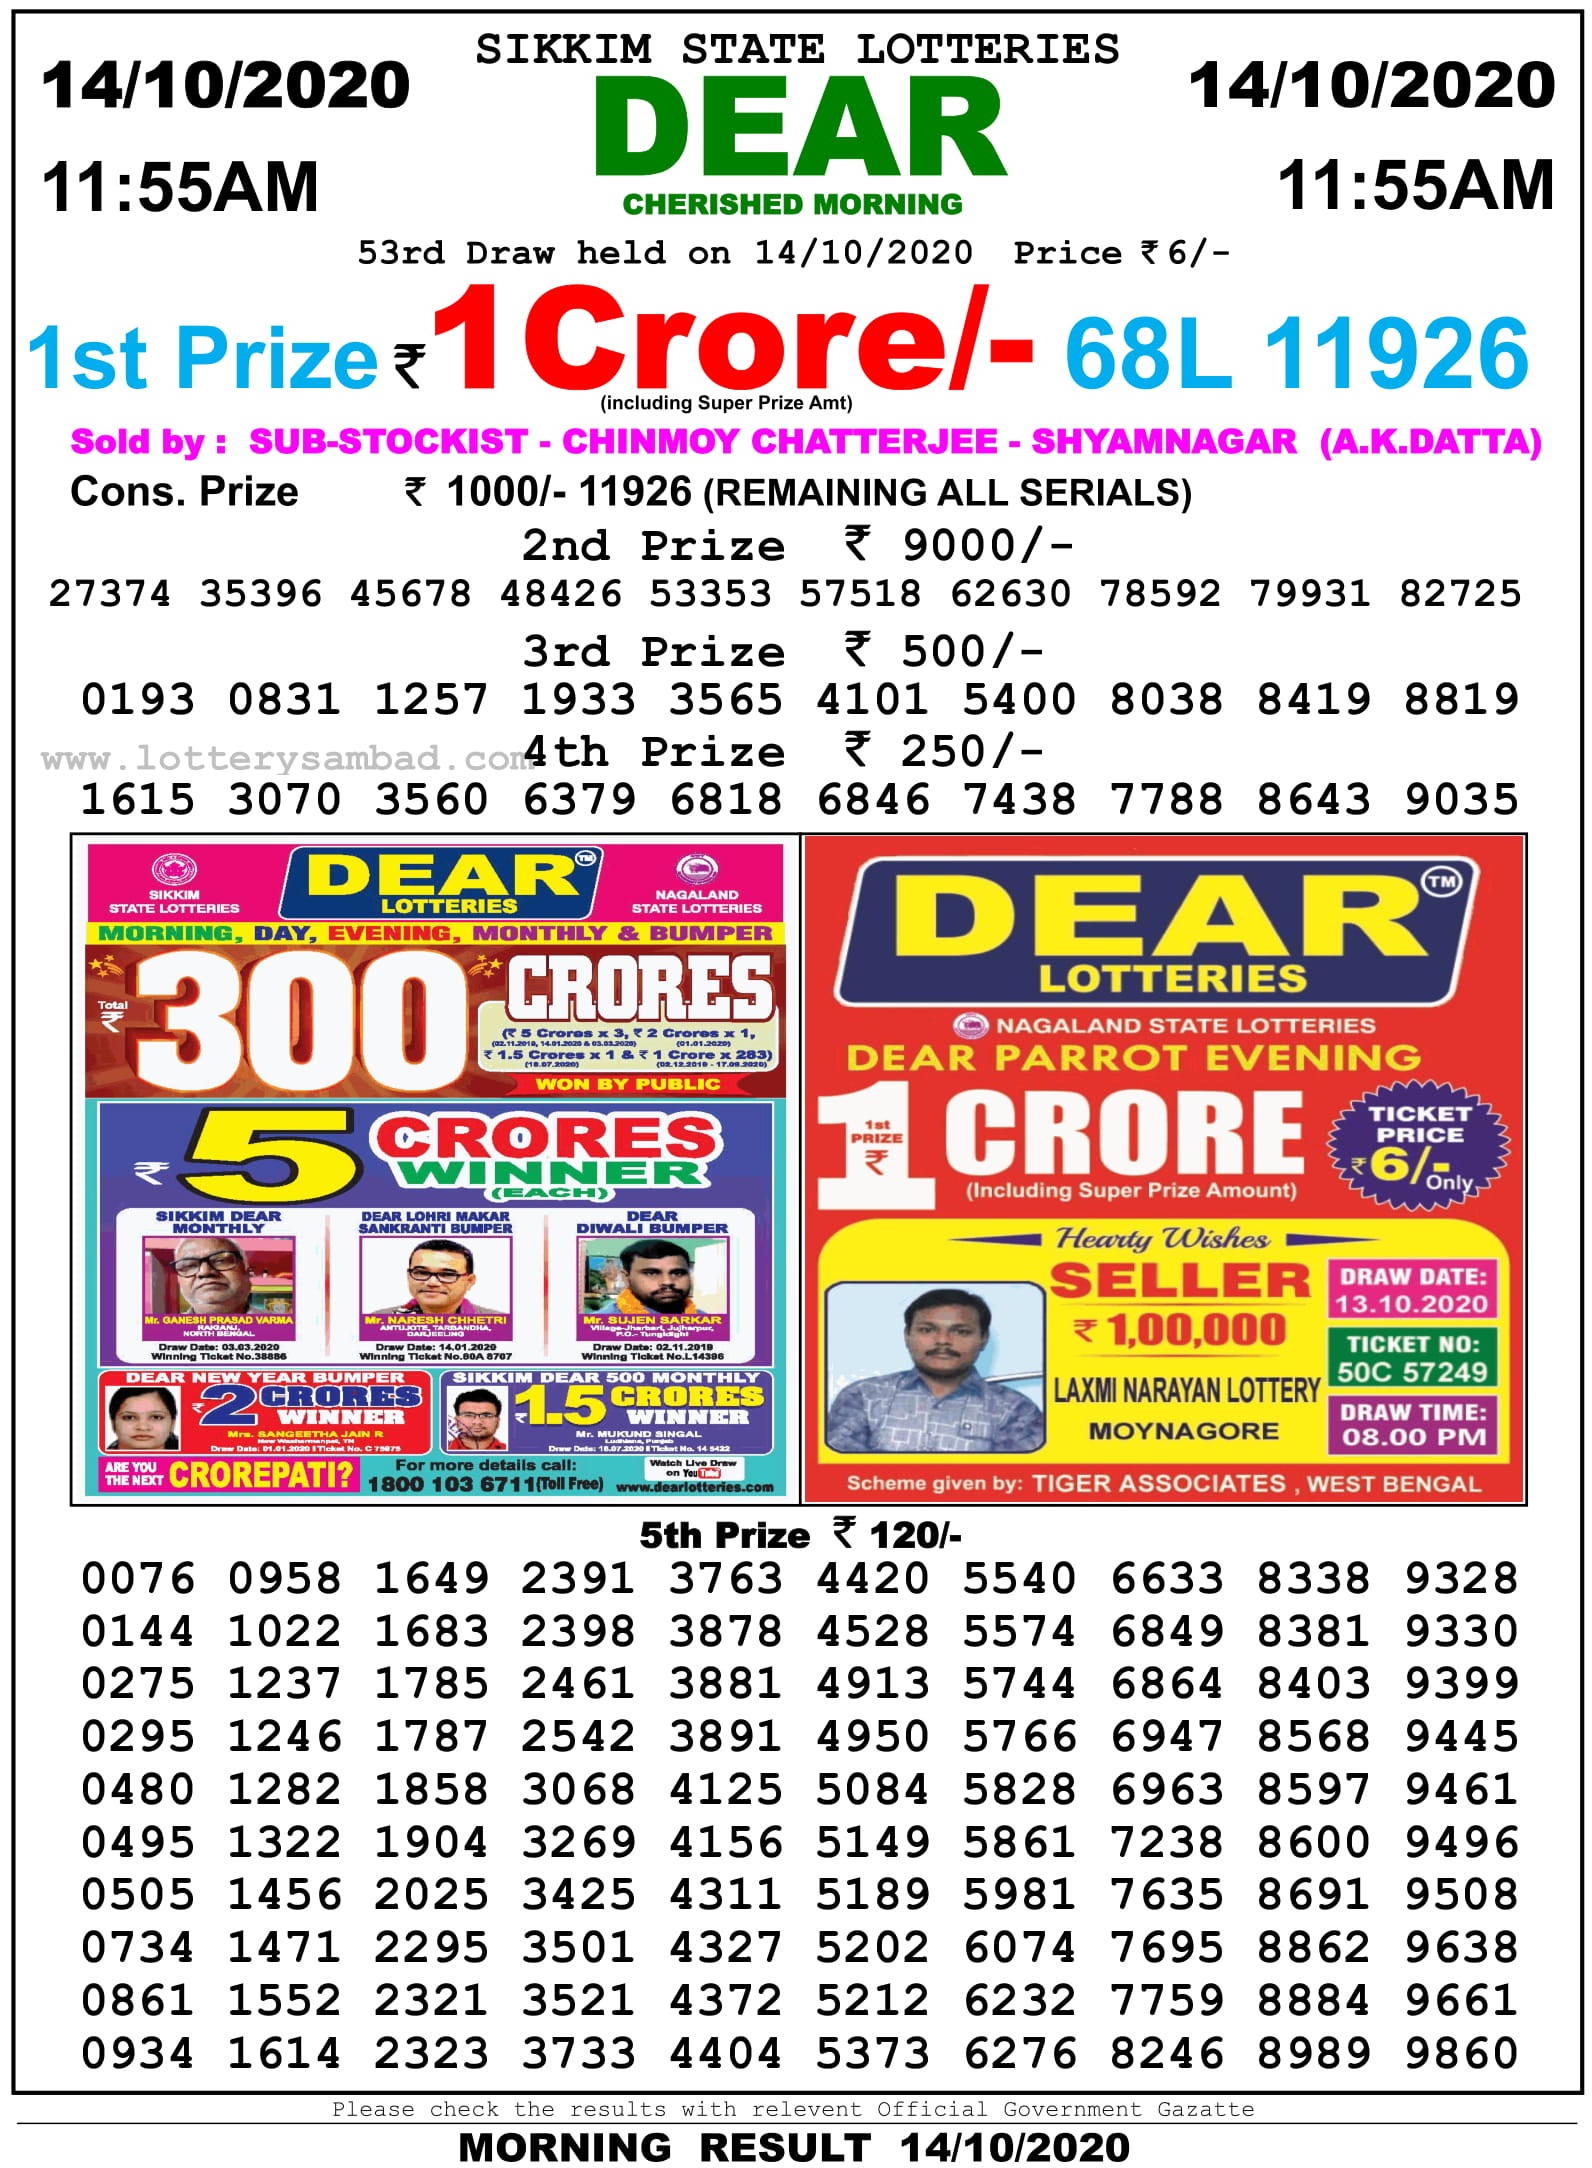 Sikkim State Lottery Result 11.55 AM 14.10.2020